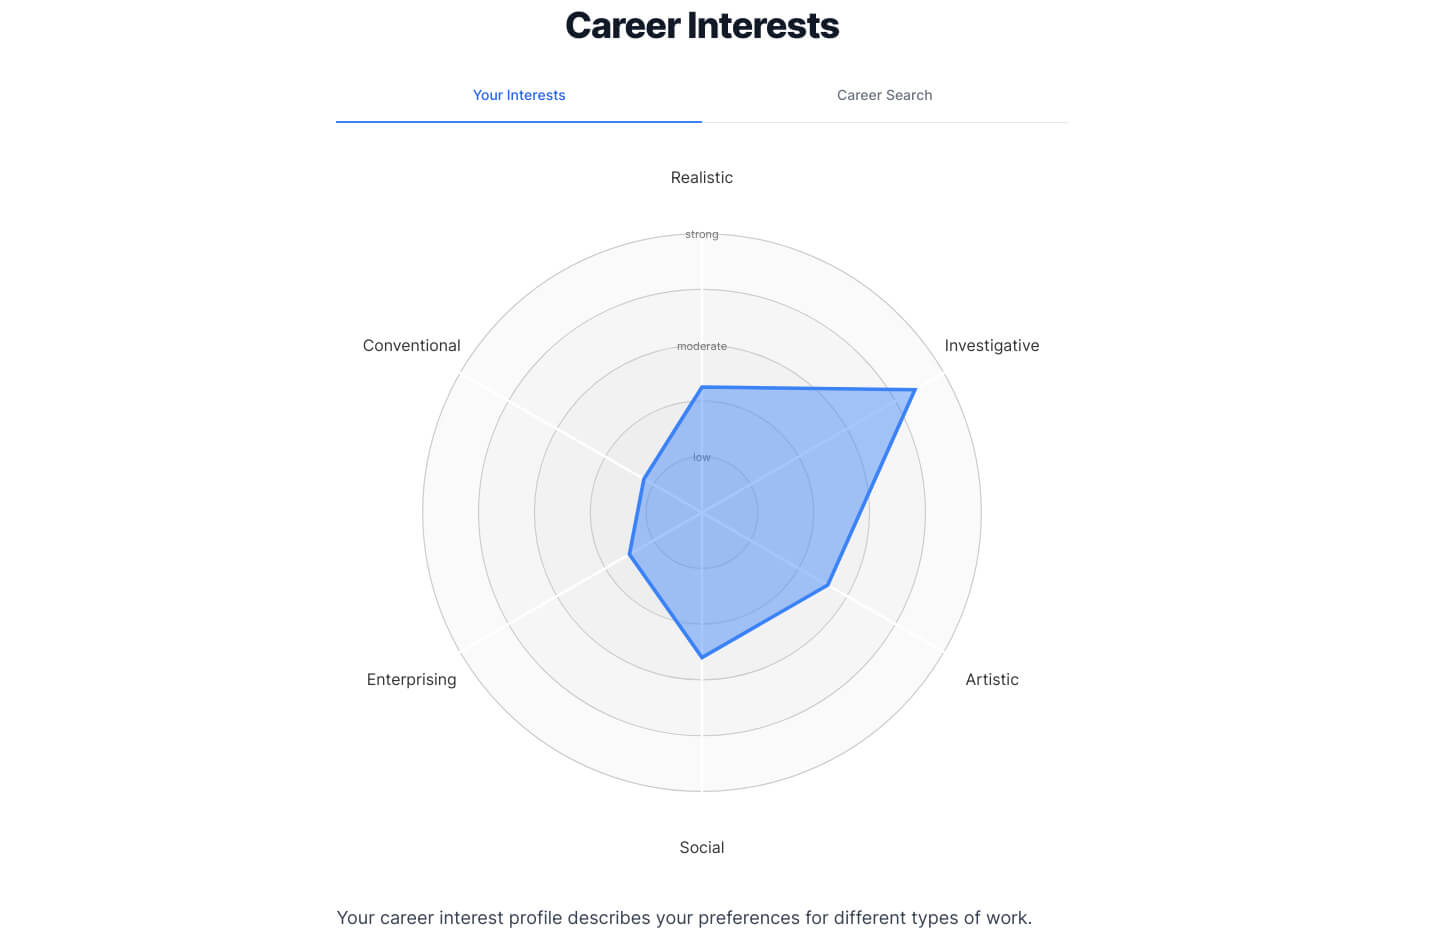 An example of a career interest profile